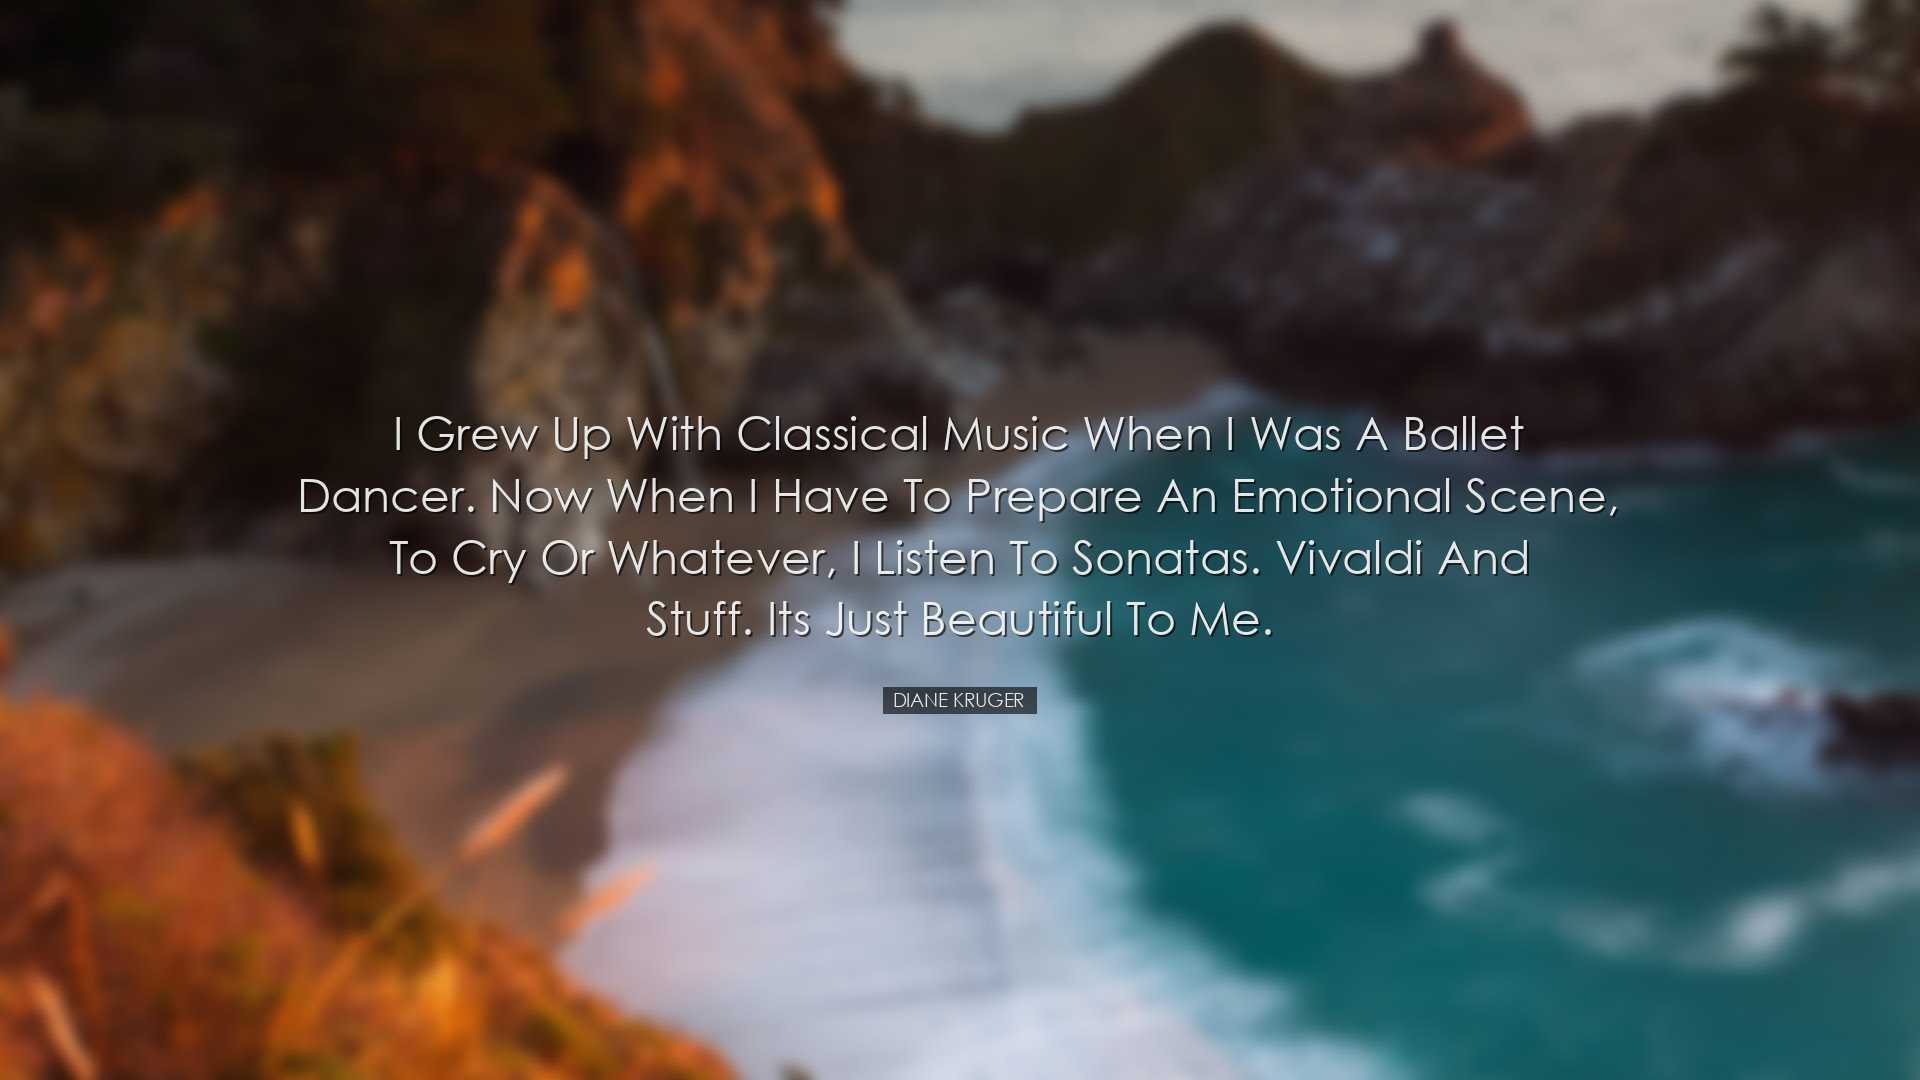 I grew up with classical music when I was a ballet dancer. Now whe